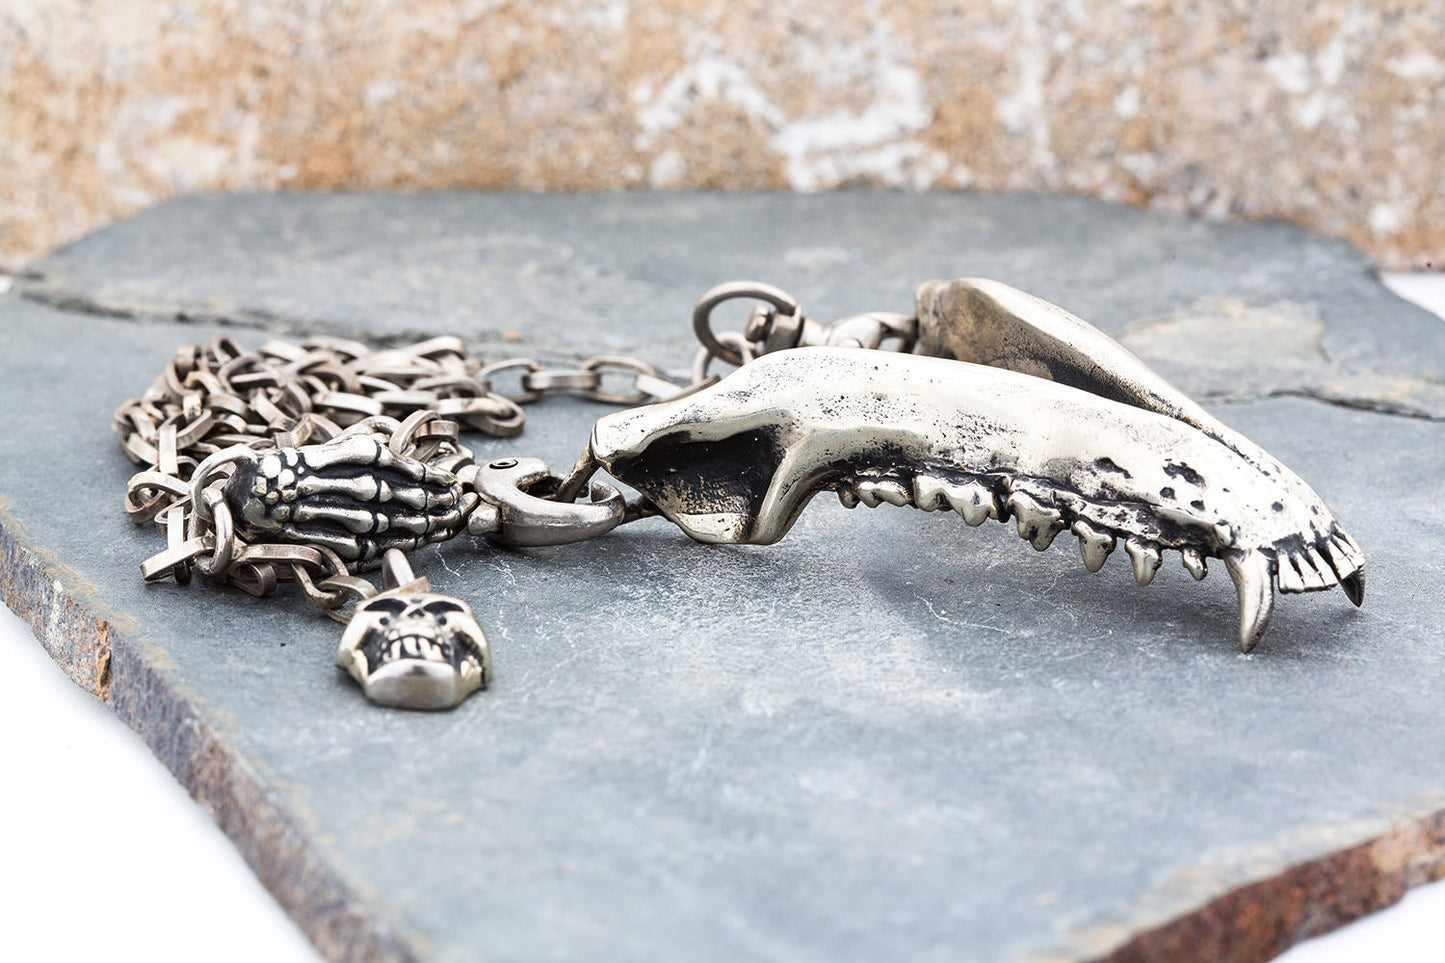 JAW GENERATION Necklace